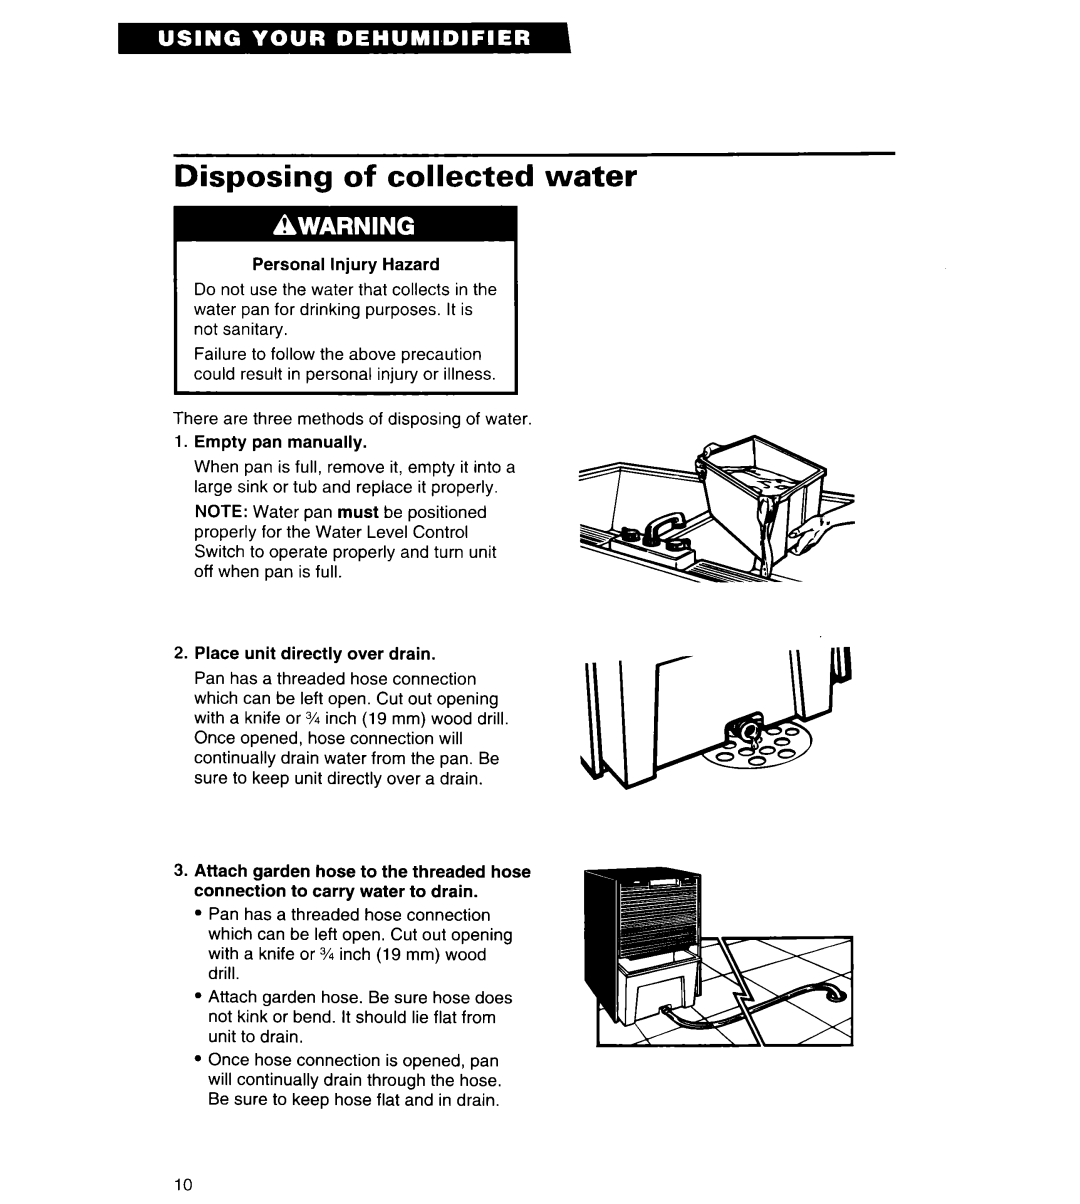 Whirlpool AD040, ADO25, AD050, AD030 important safety instructions Disposing of collected water 